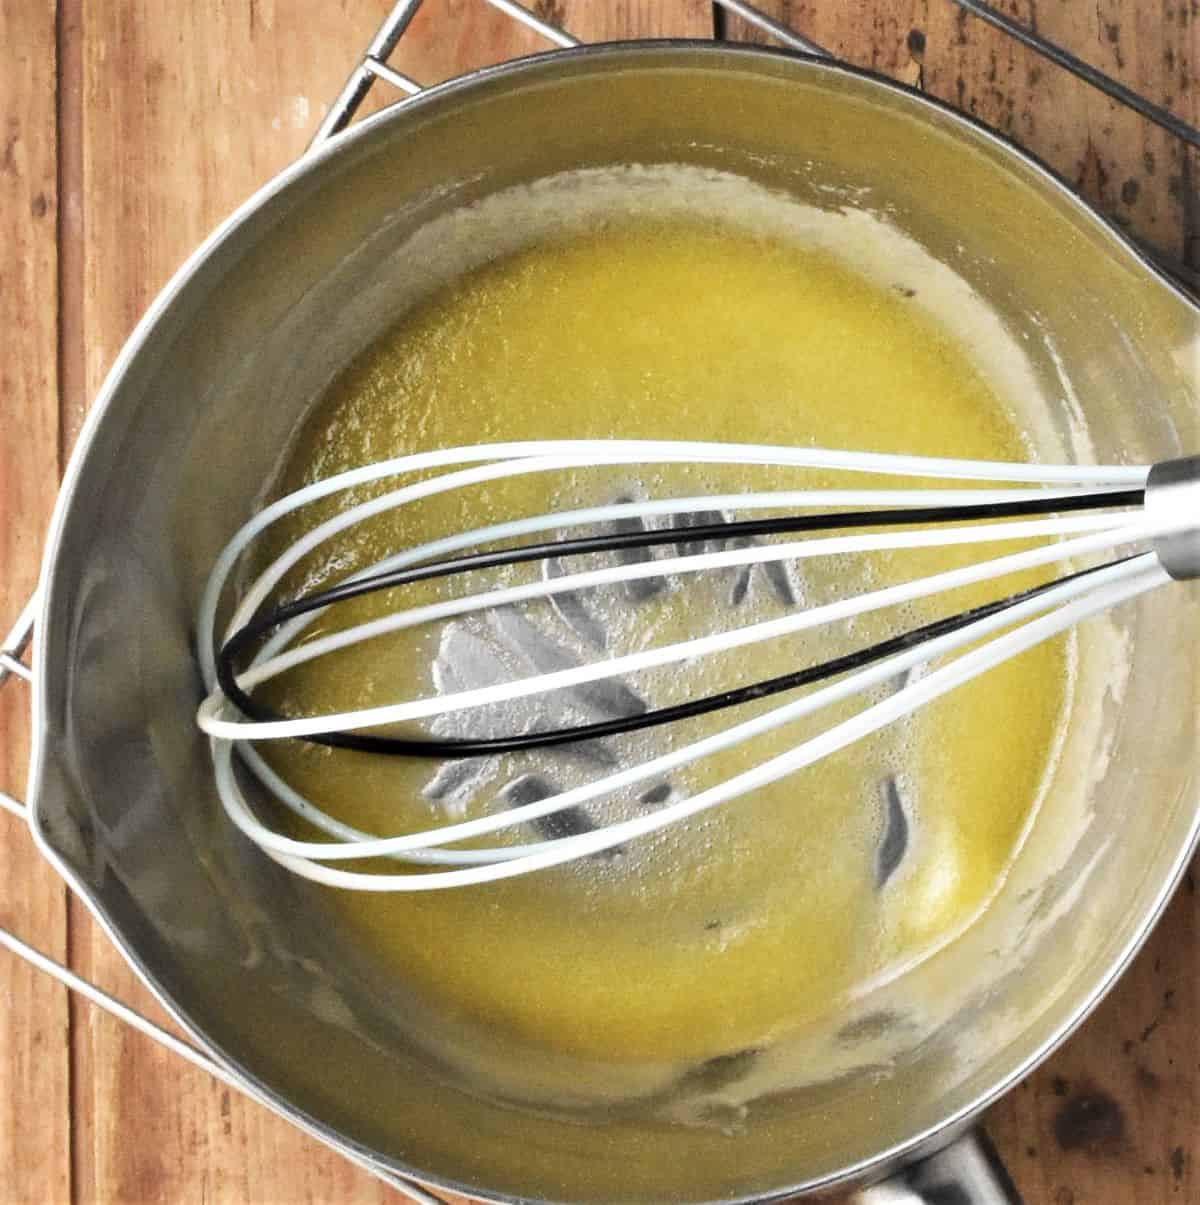 Making smooth roux mixture in pan with whisk.